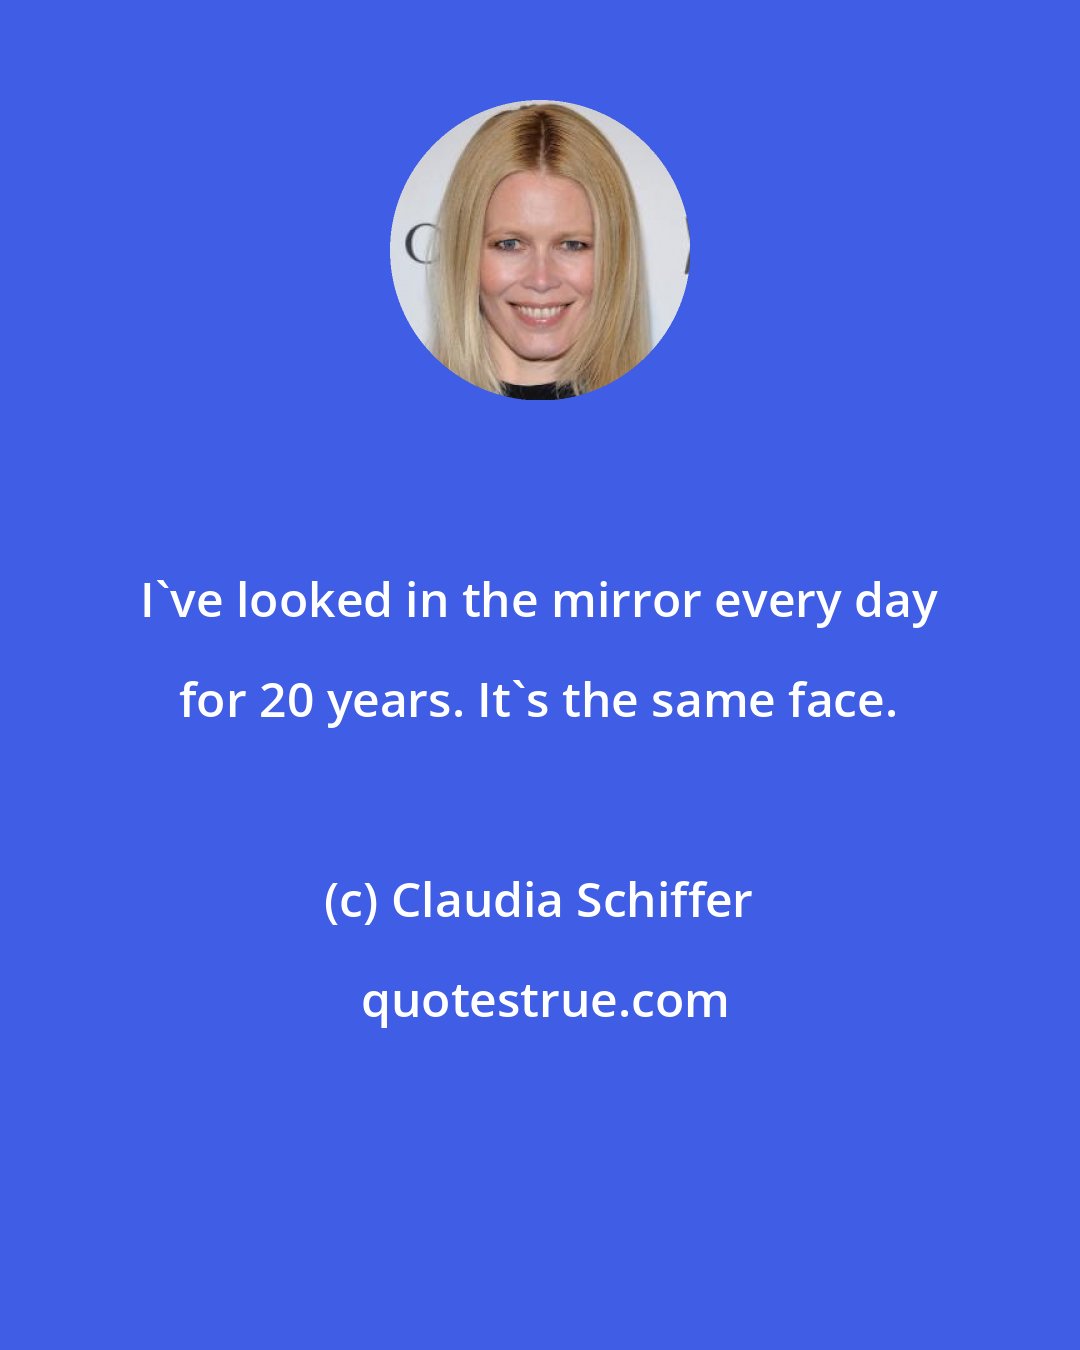 Claudia Schiffer: I've looked in the mirror every day for 20 years. It's the same face.